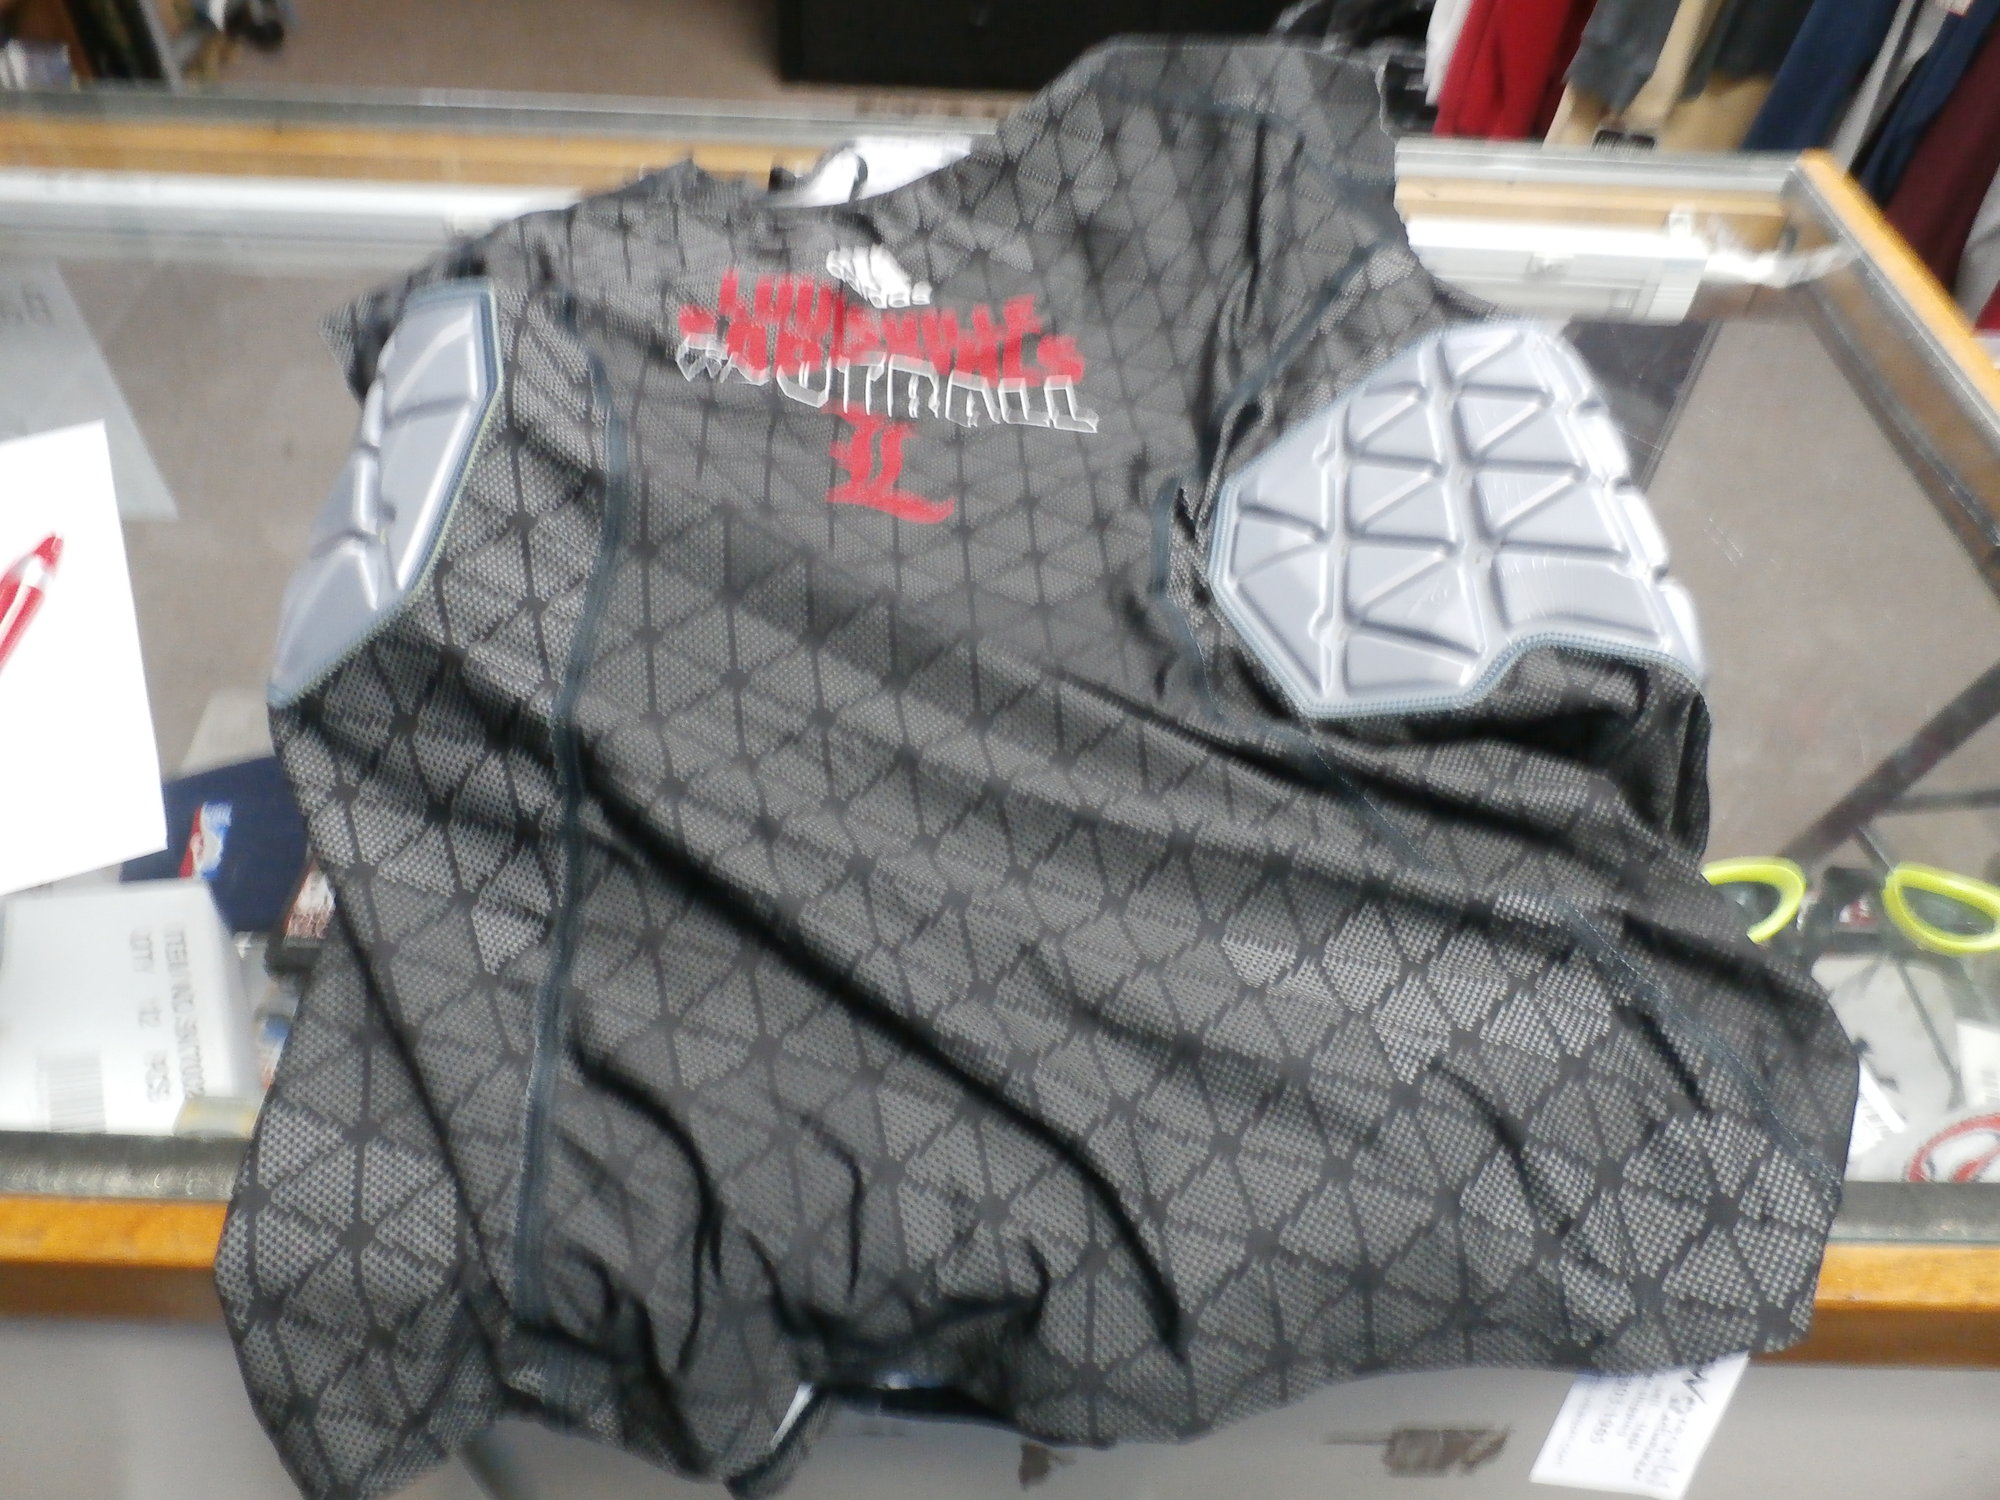 Adidas Techfit Louisville  Recycled ActiveWear ~ FREE SHIPPING USA ONLY~